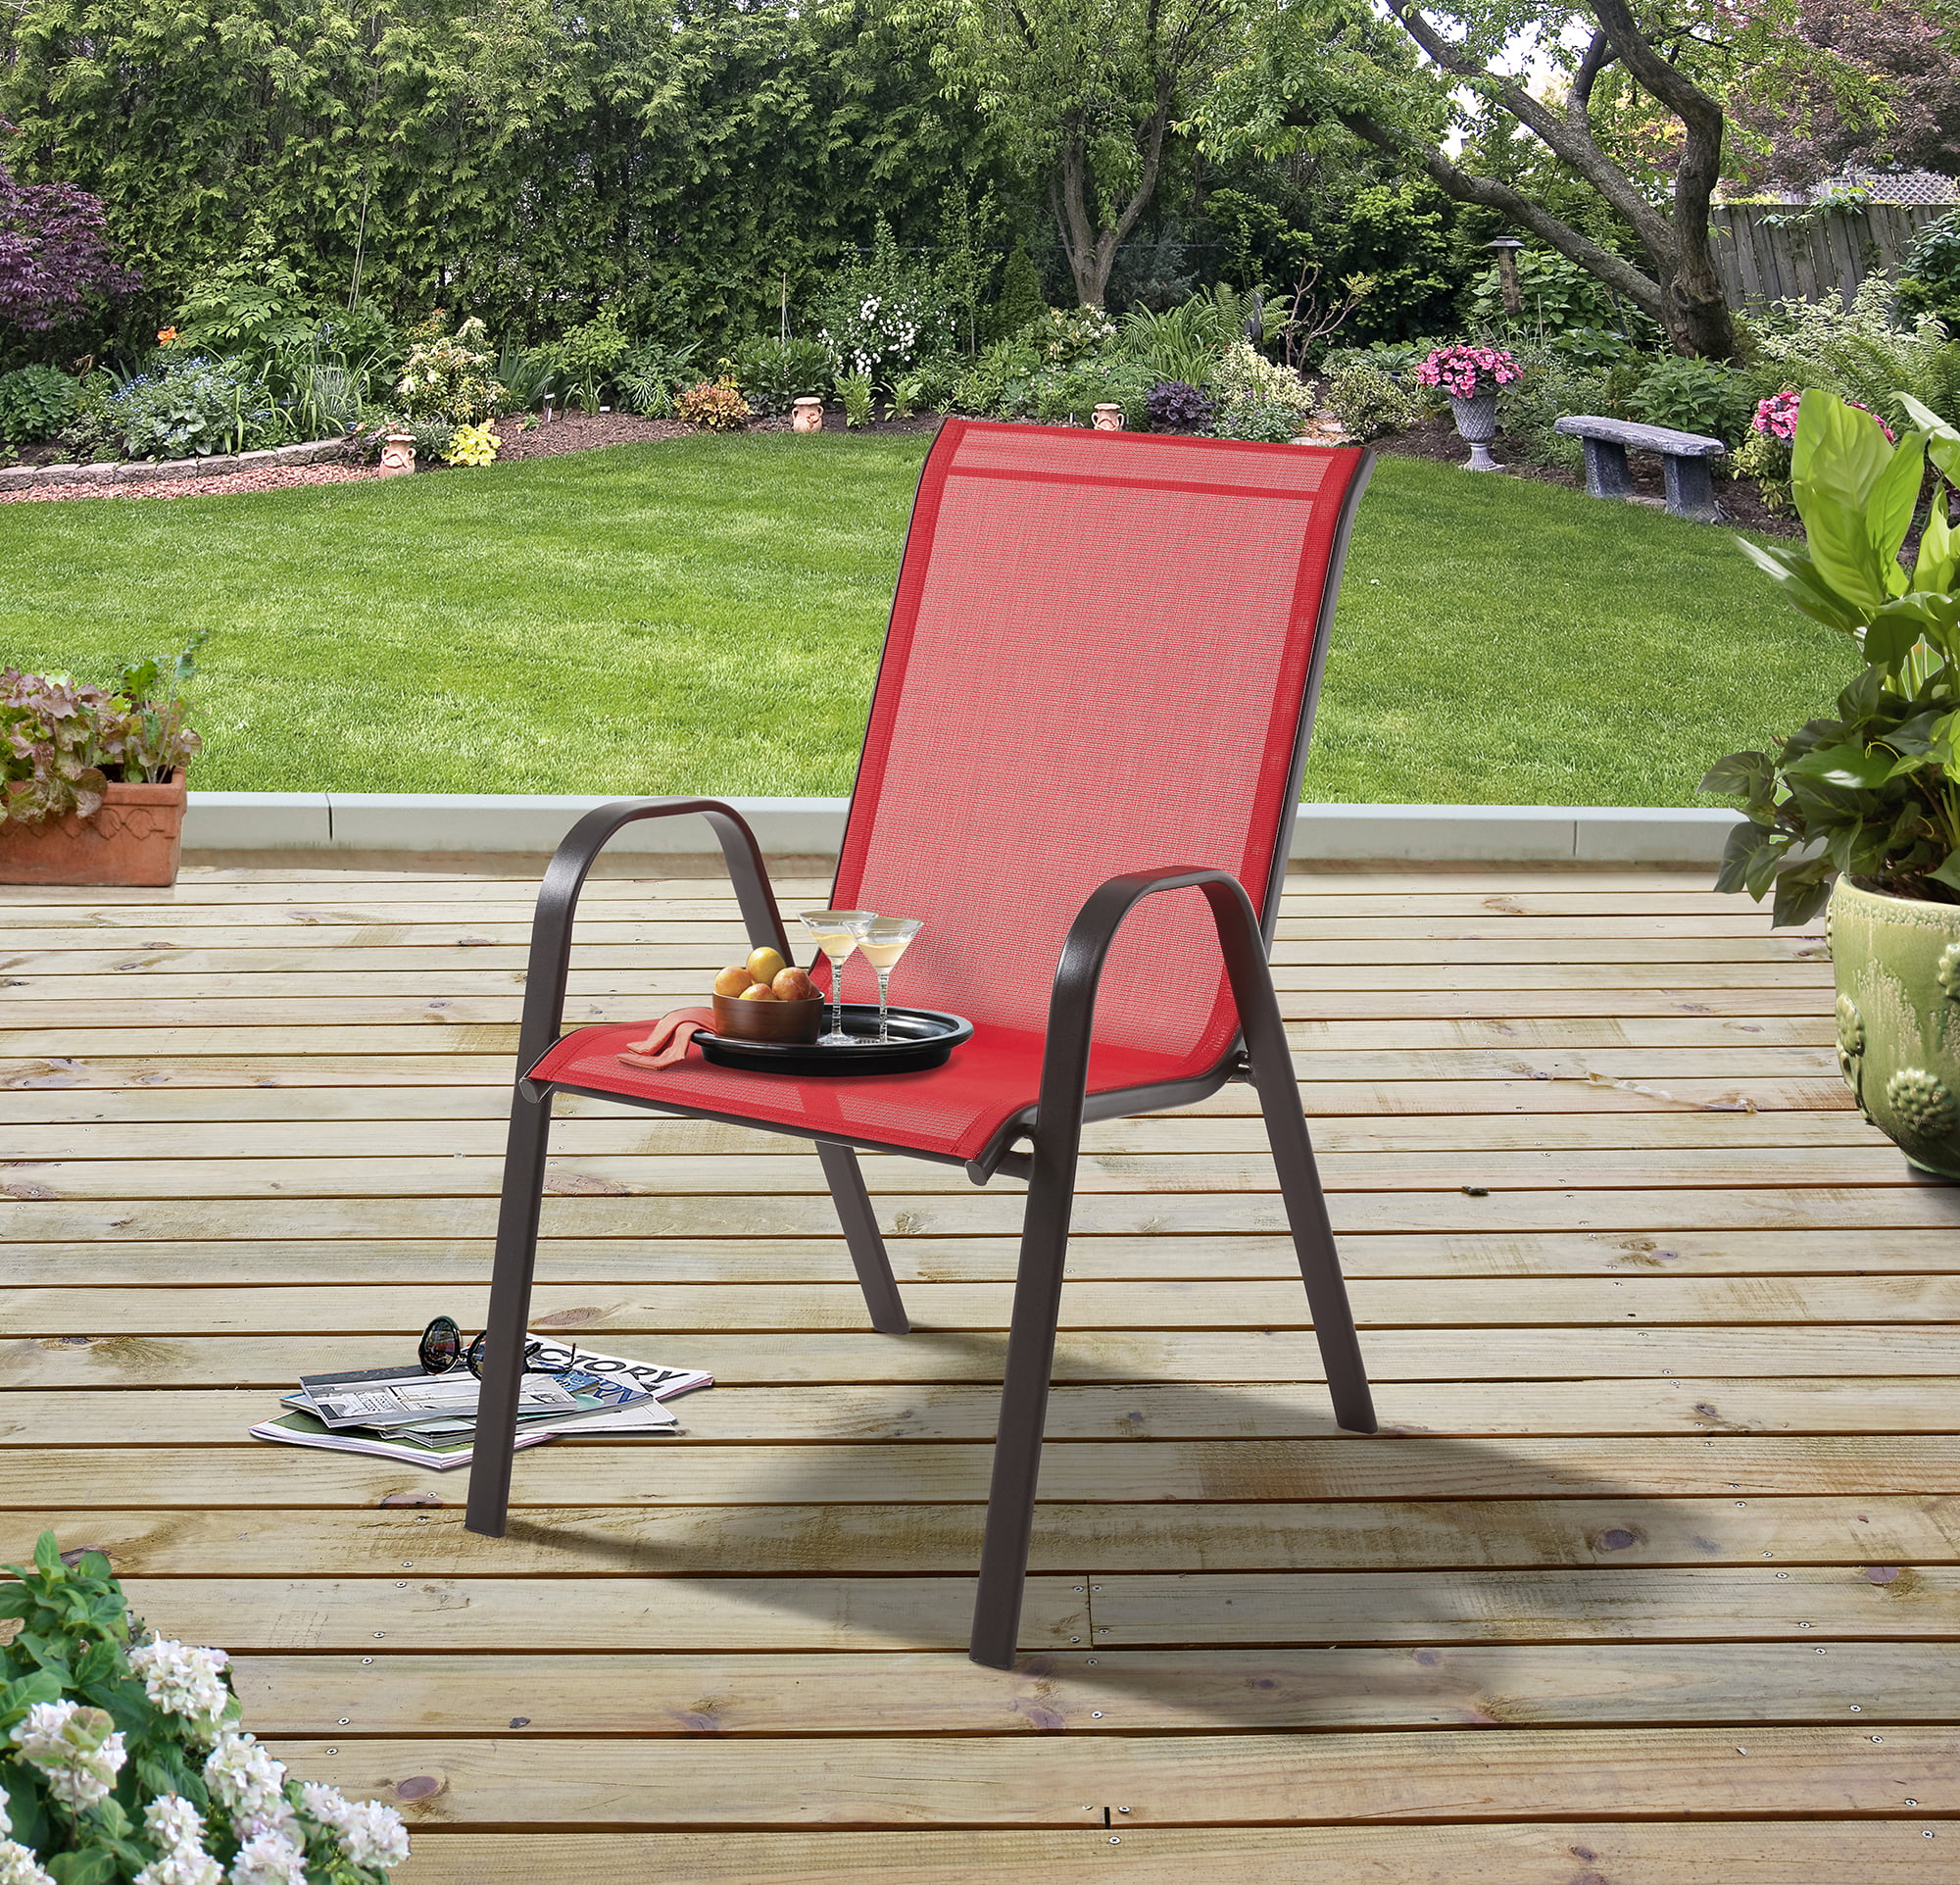 Mainstays Heritage Park Stacking Sling Outdoor Patio Chair, Red